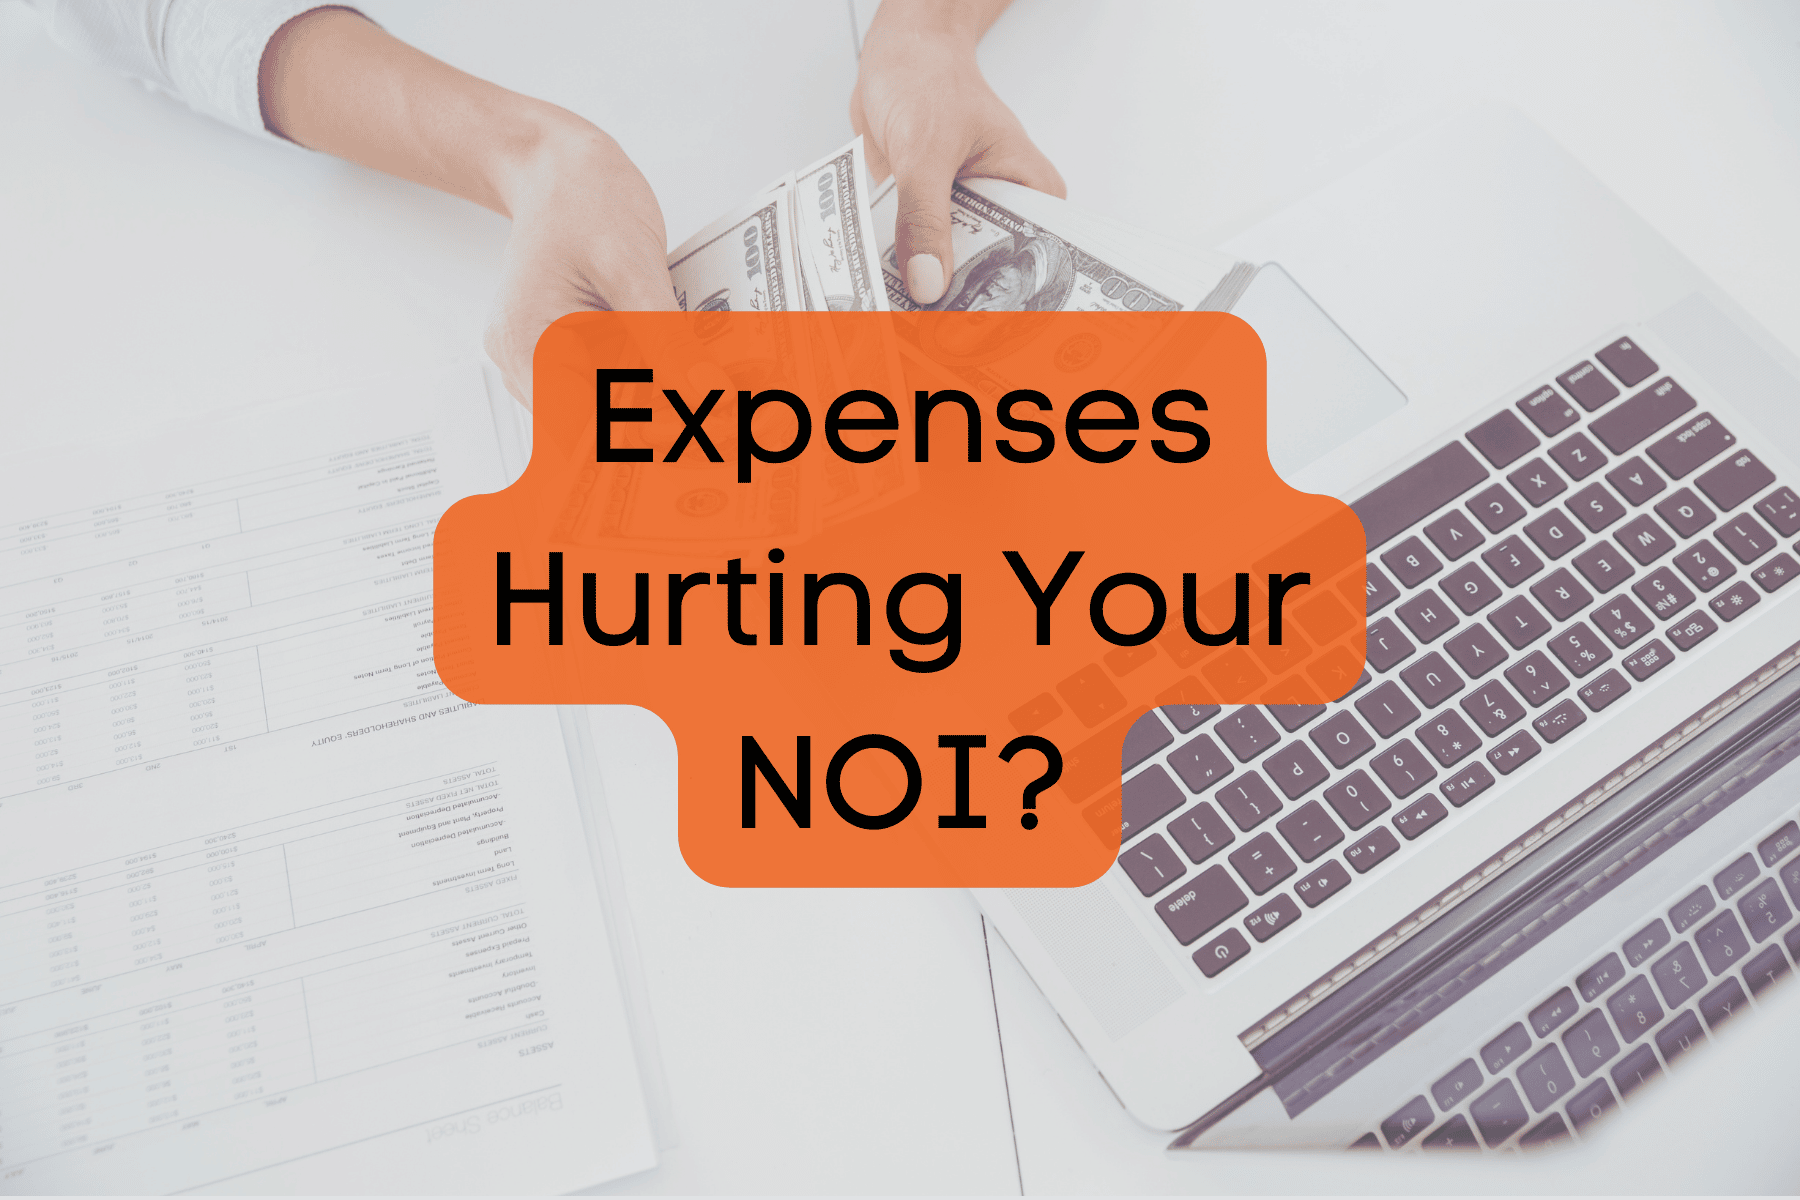 Expenses hurting your NOI?